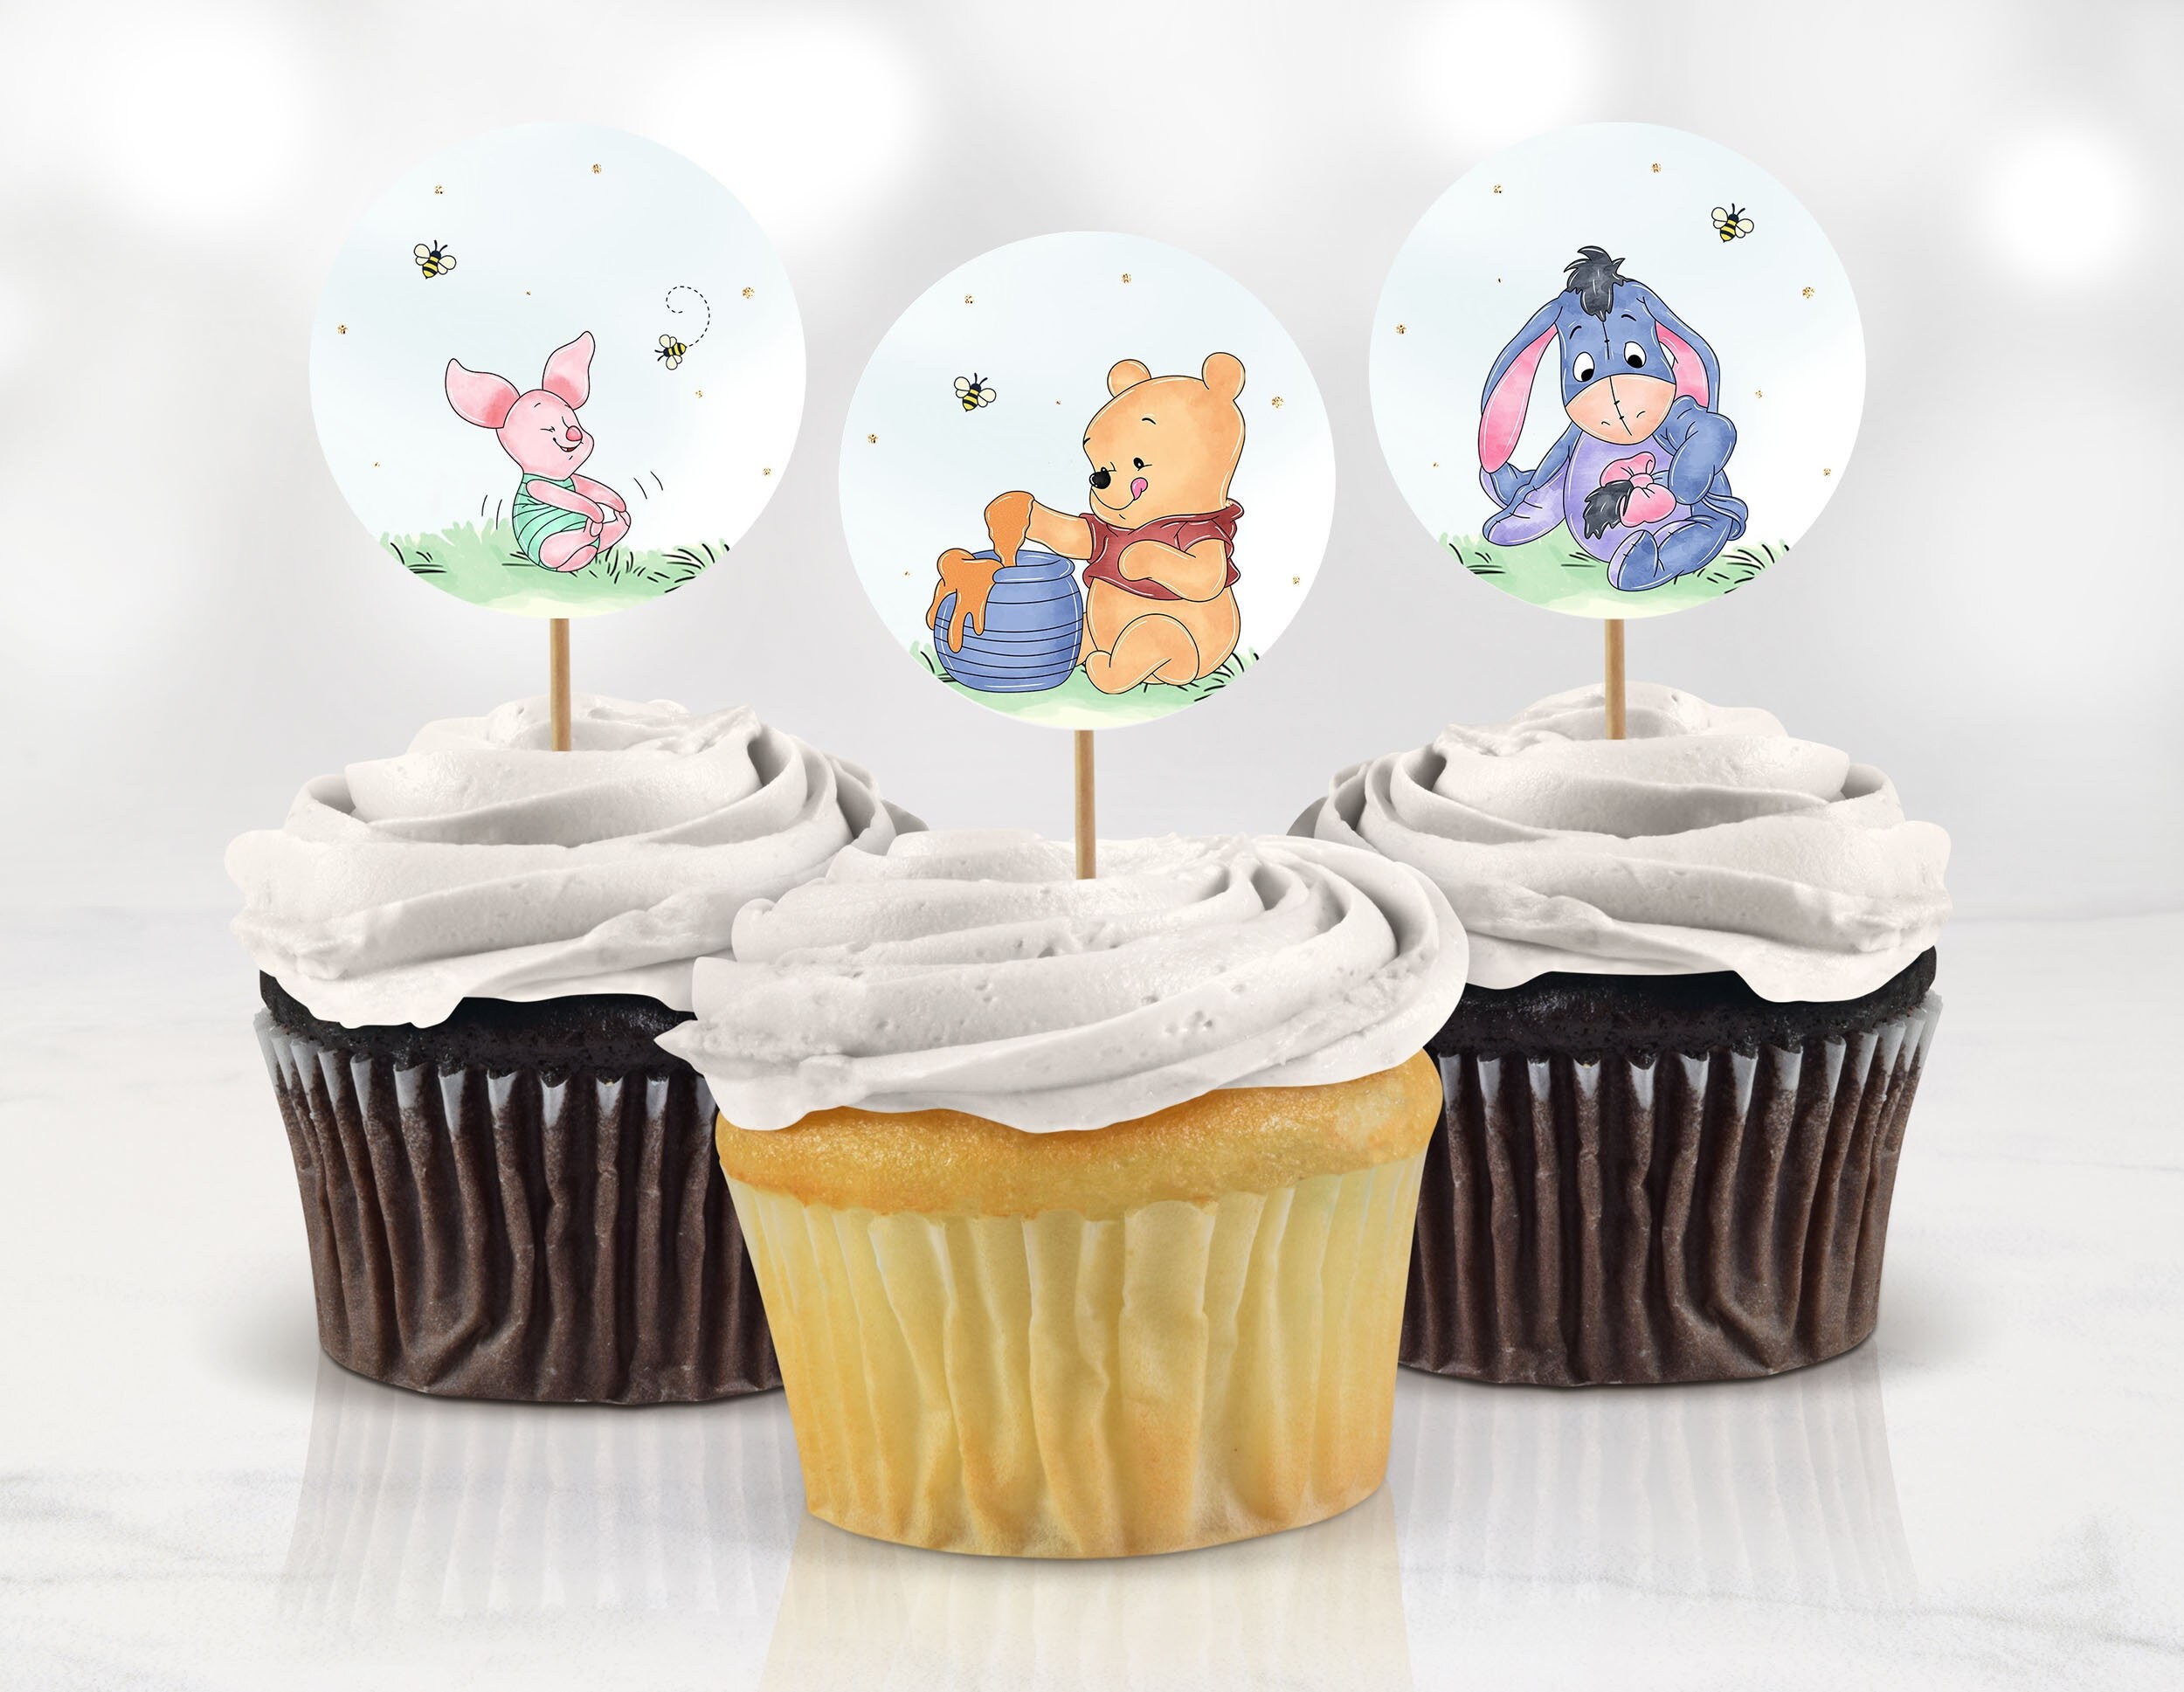 Winnie the Pooh Cupcake Topper Decorations, Party Decoration Centerpieces,  Classic Pooh Bear Cut Out. Vintage Pooh Cake Topper, Digital 